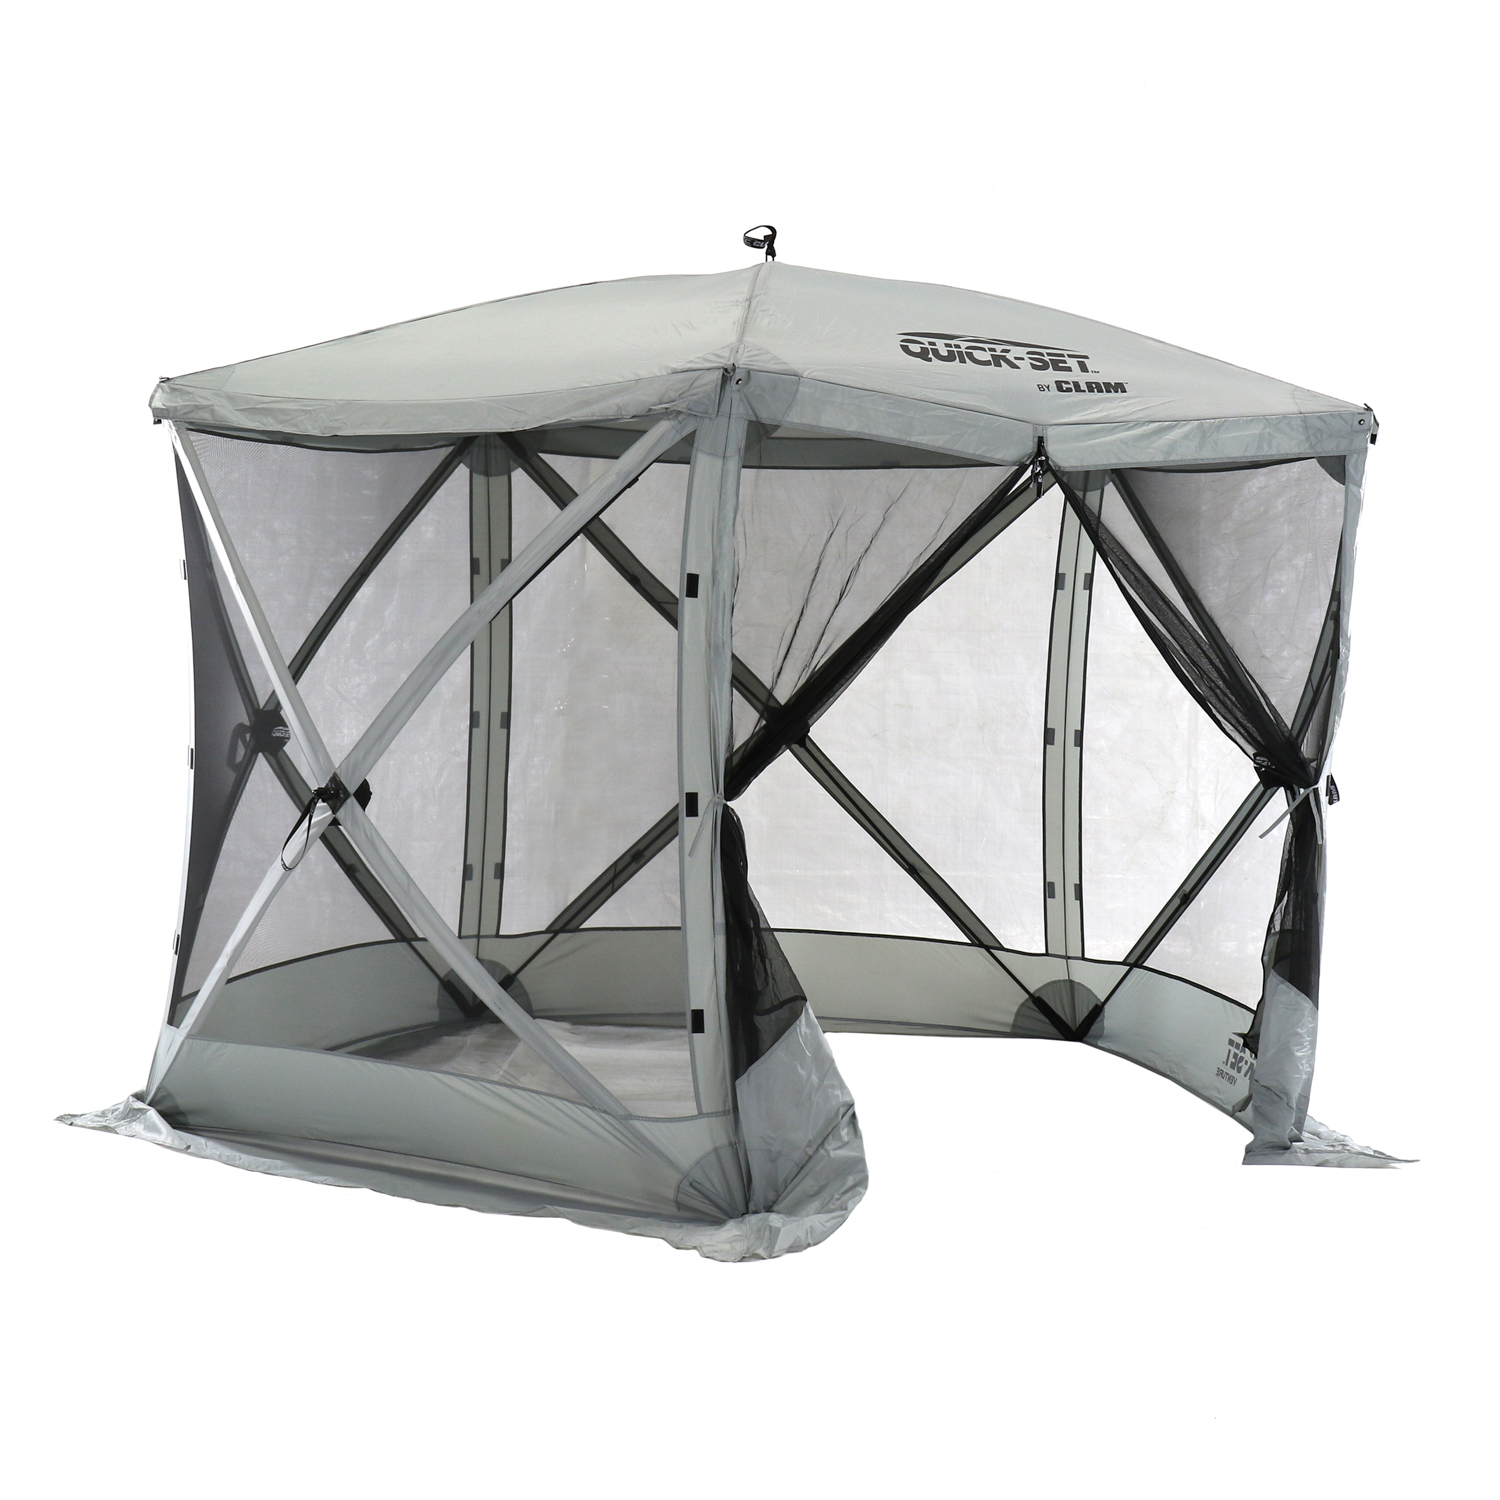 Clam CLAM Quick-Set Venture 9 x 9 Ft Portable Outdoor Camping Canopy  Shelter, Gray